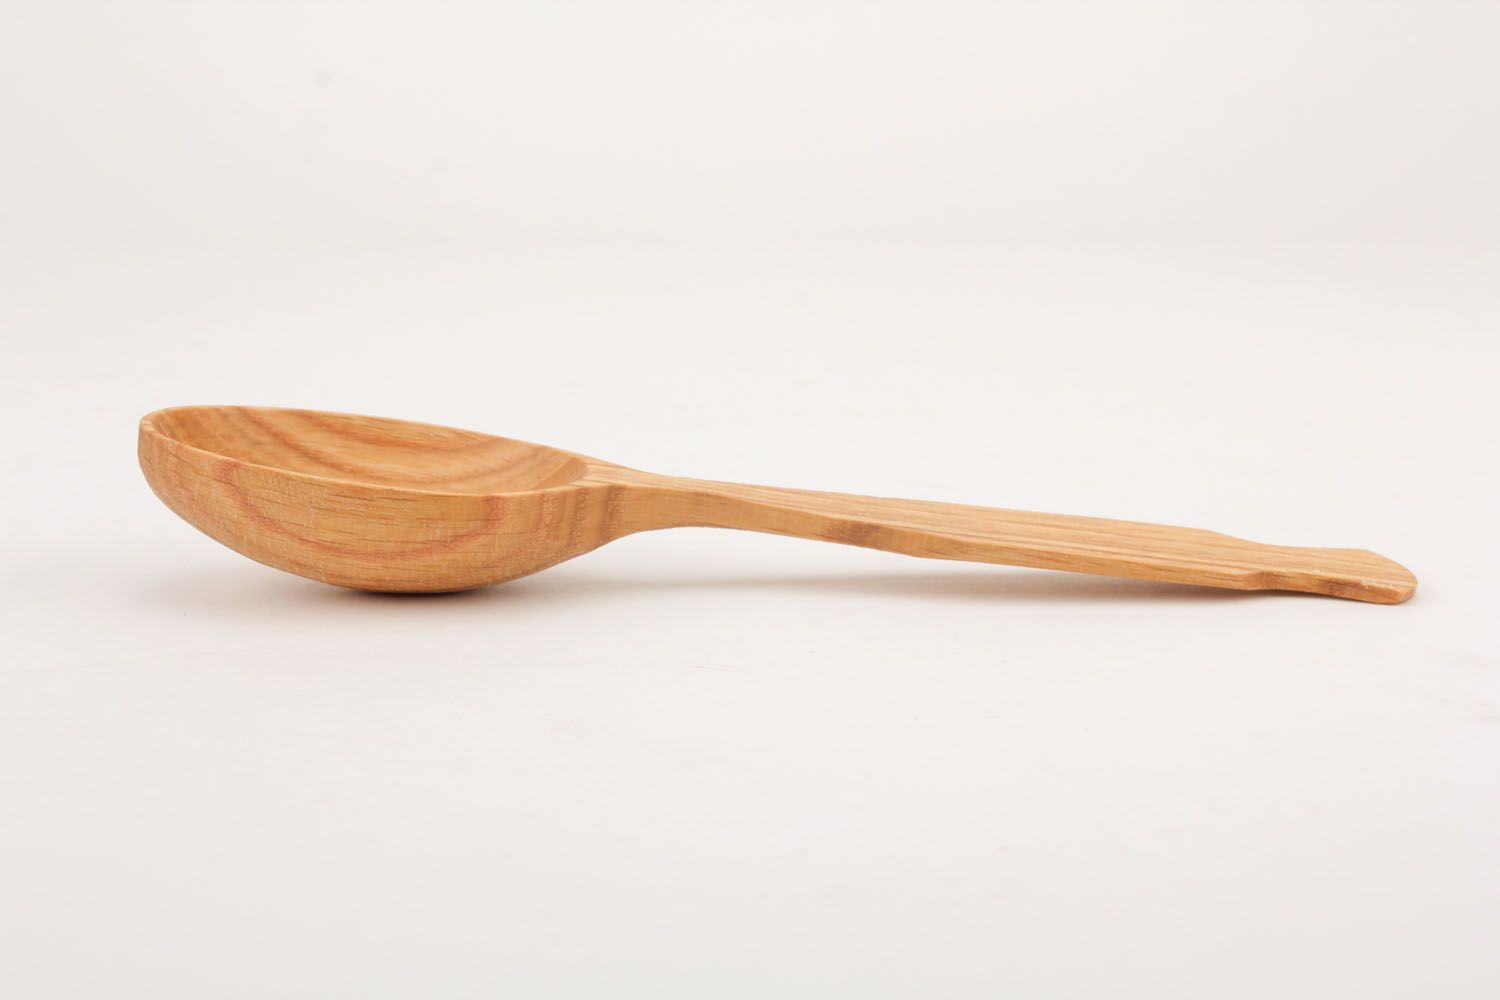 Homemade wooden spoon photo 2